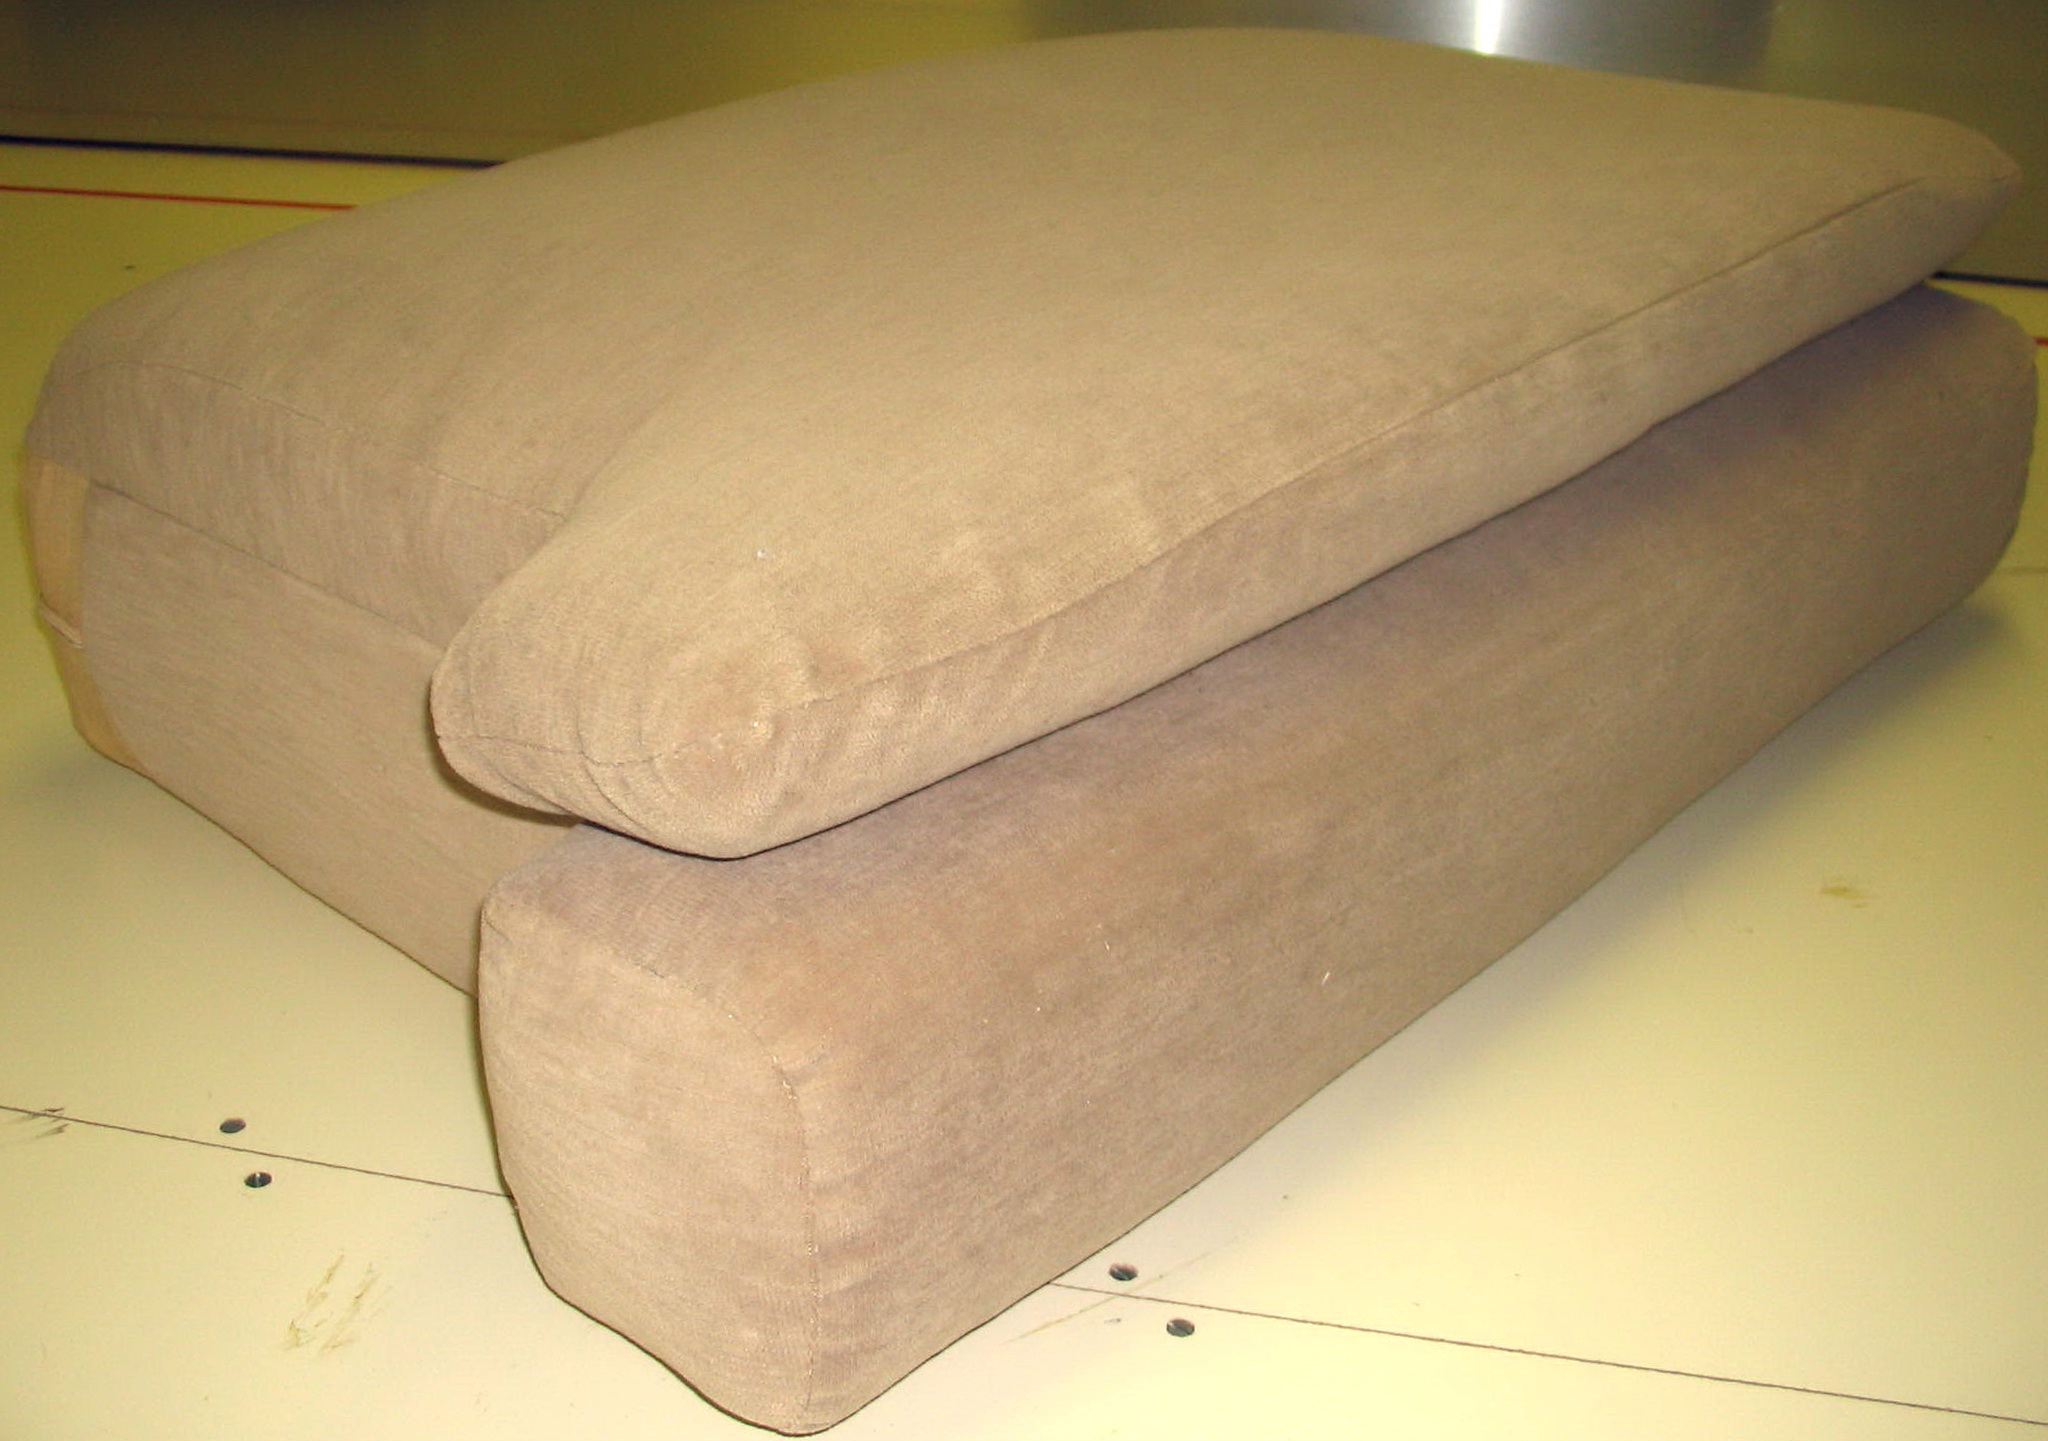 Replace Sofa Cushions With Memory Foam | Home Design Ideas